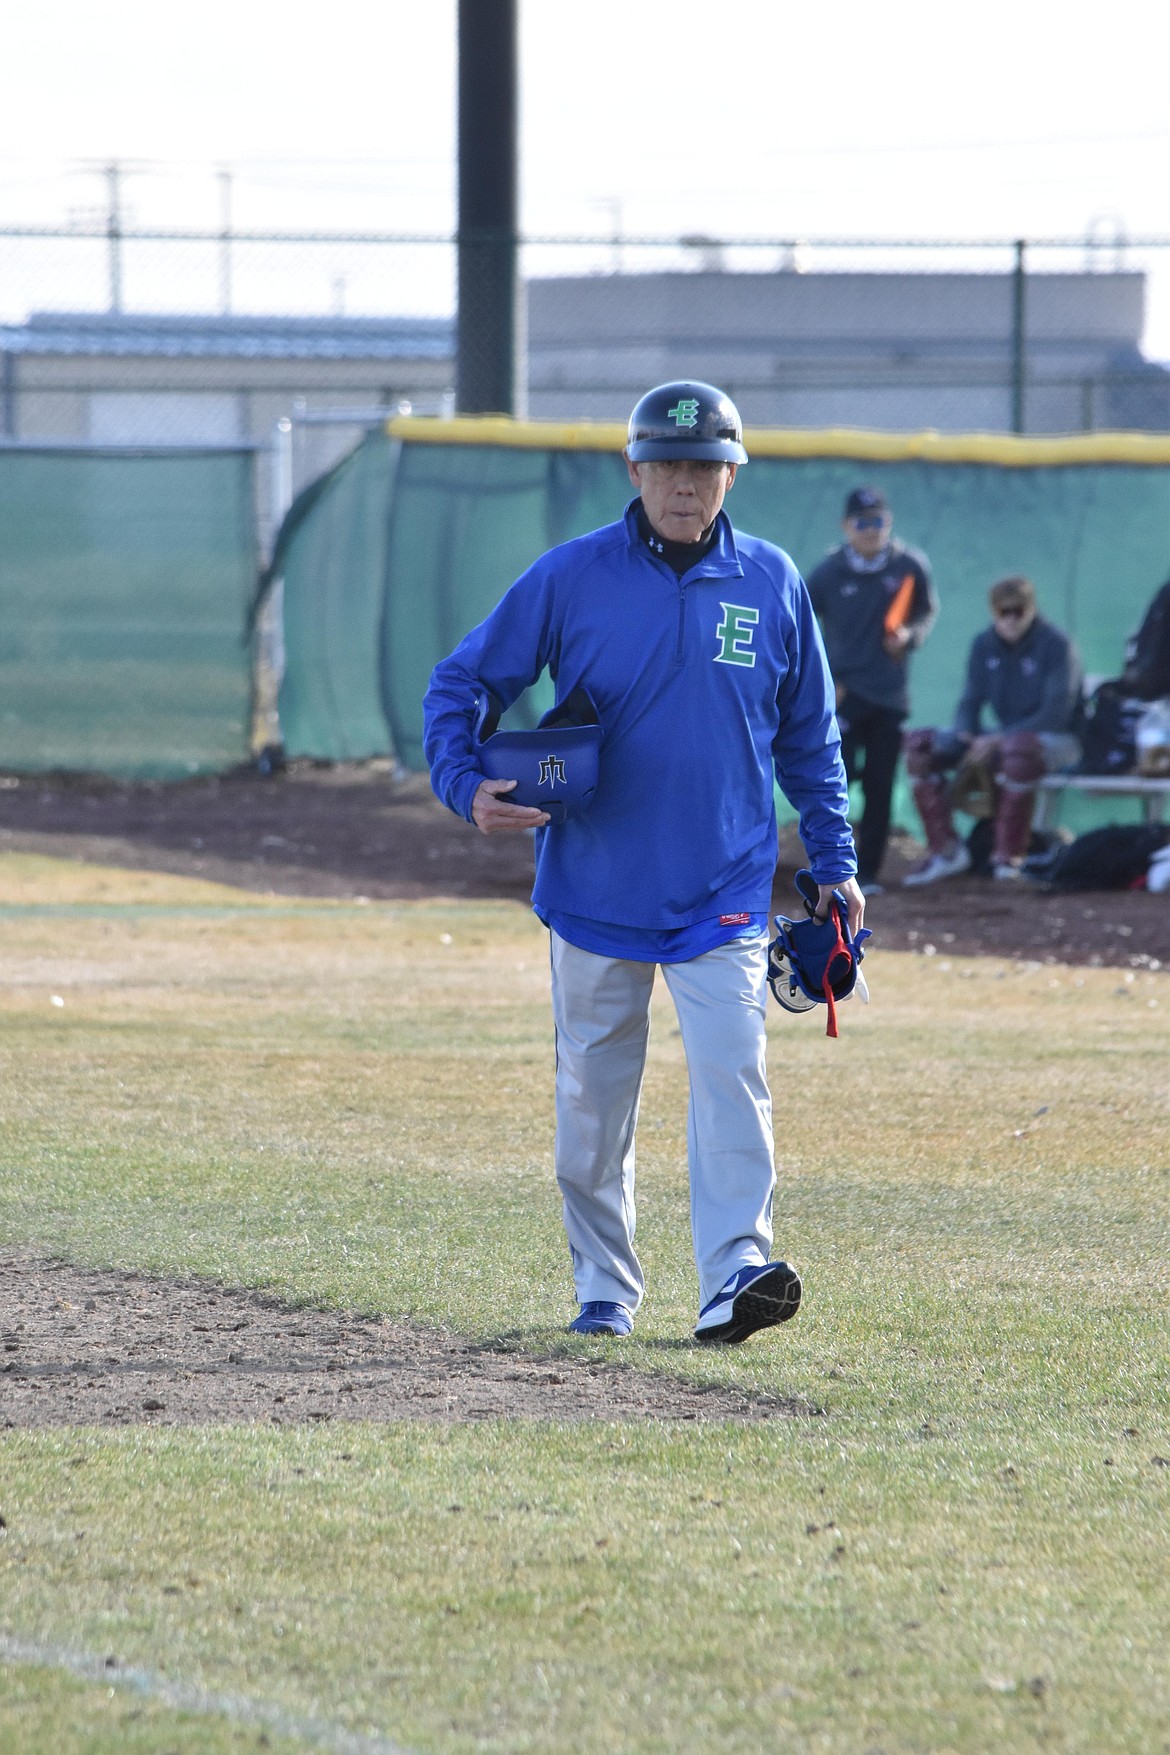 Ron Omori, fromer MLHS student, currently coaches for Edmonds College. Here he is pictured coaching his team when they went up against Big Bend on March 18. His team beat Big Bend Community College twice in a double-header during the tournament.